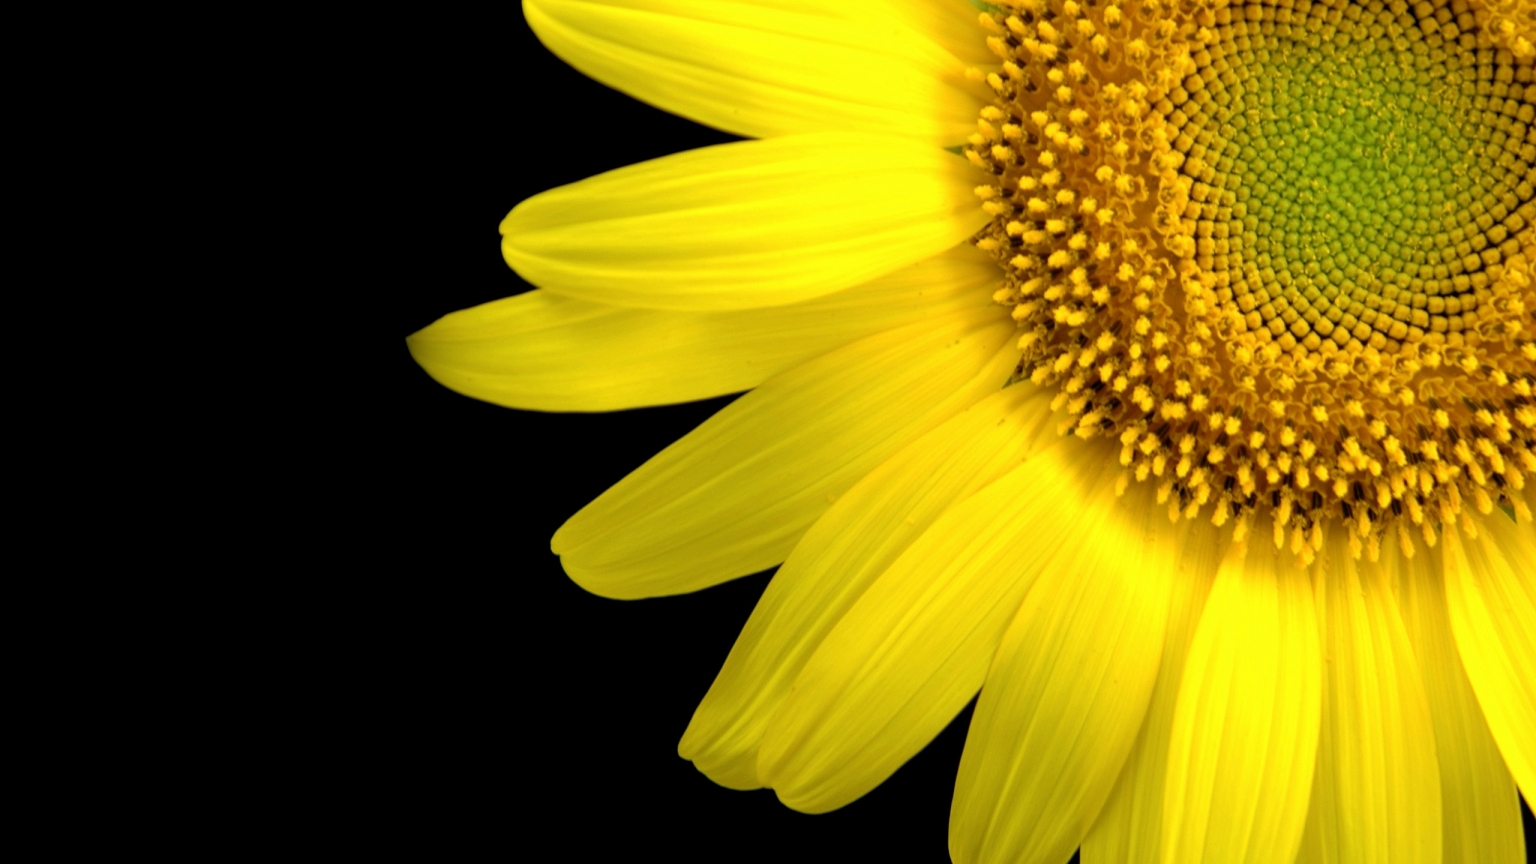 Sunflower Close-Up for 1536 x 864 HDTV resolution